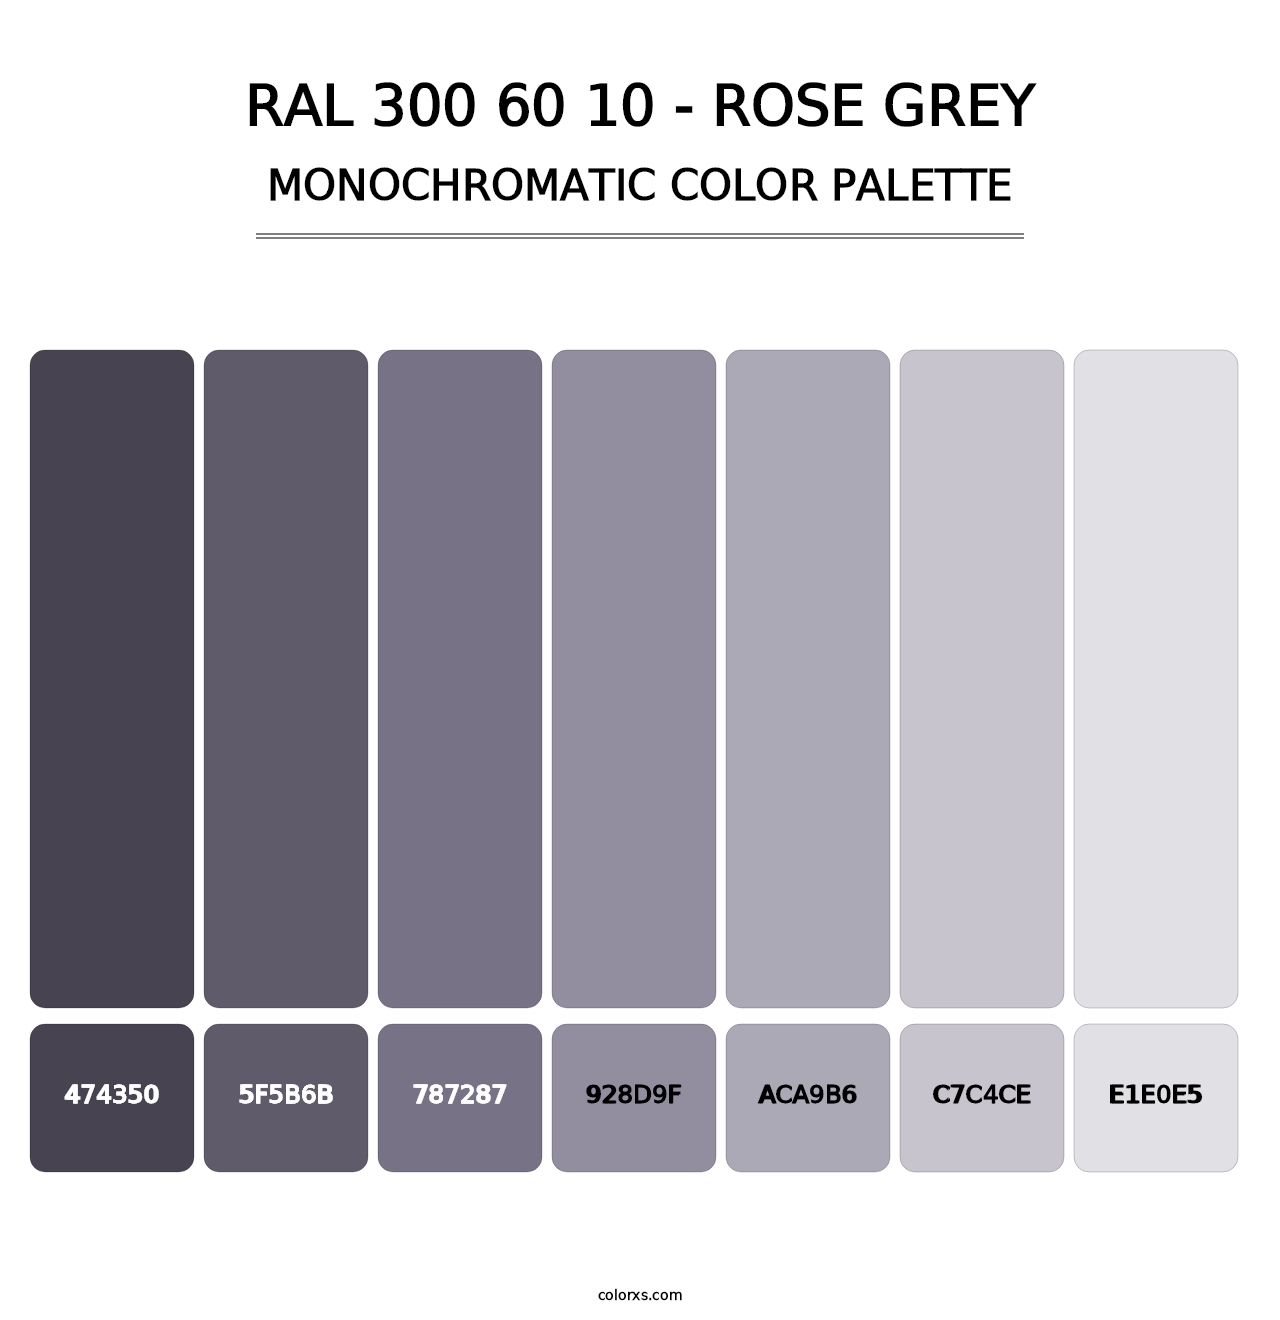 RAL 300 60 10 - Rose Grey - Monochromatic Color Palette